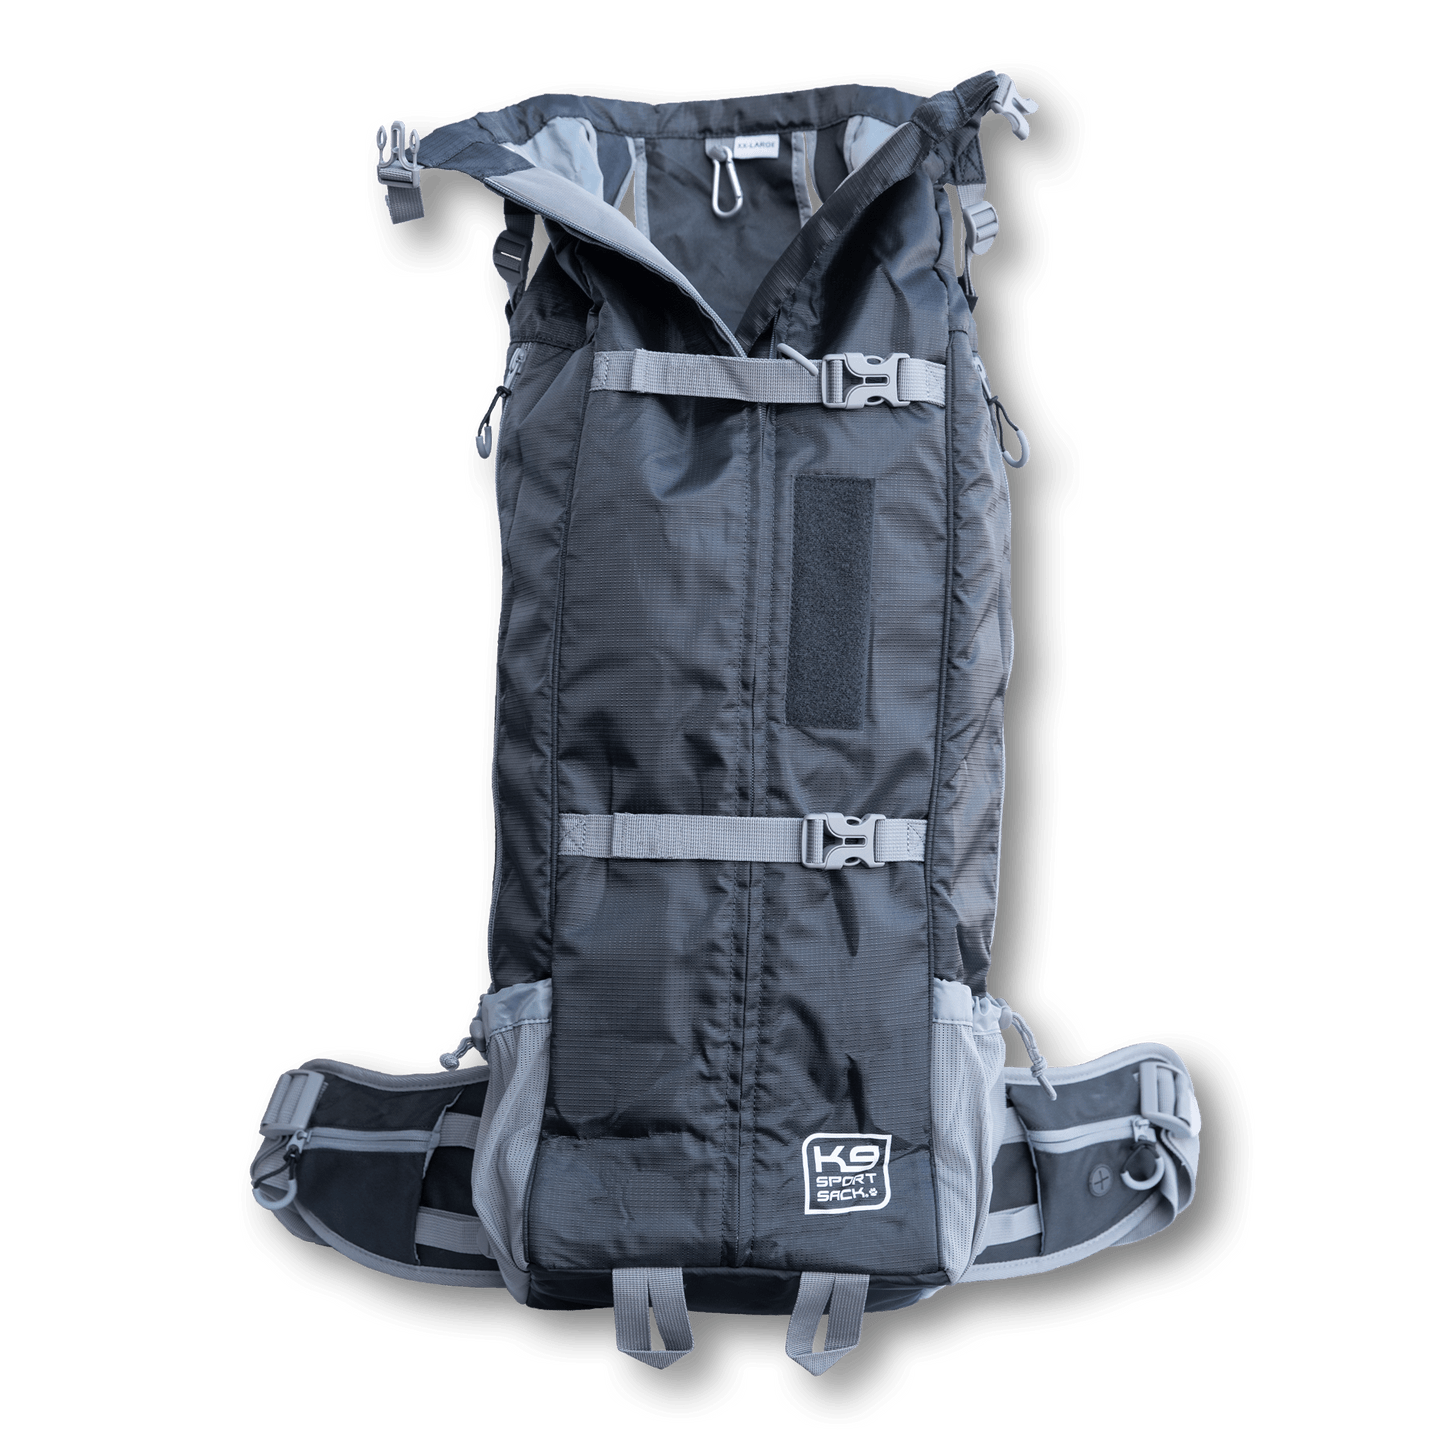 K9 Sport Sack - KOLOSSUS | Big Dog Carrier & Backpacking Pack - Large (20"-23" from collar to tail) / Black